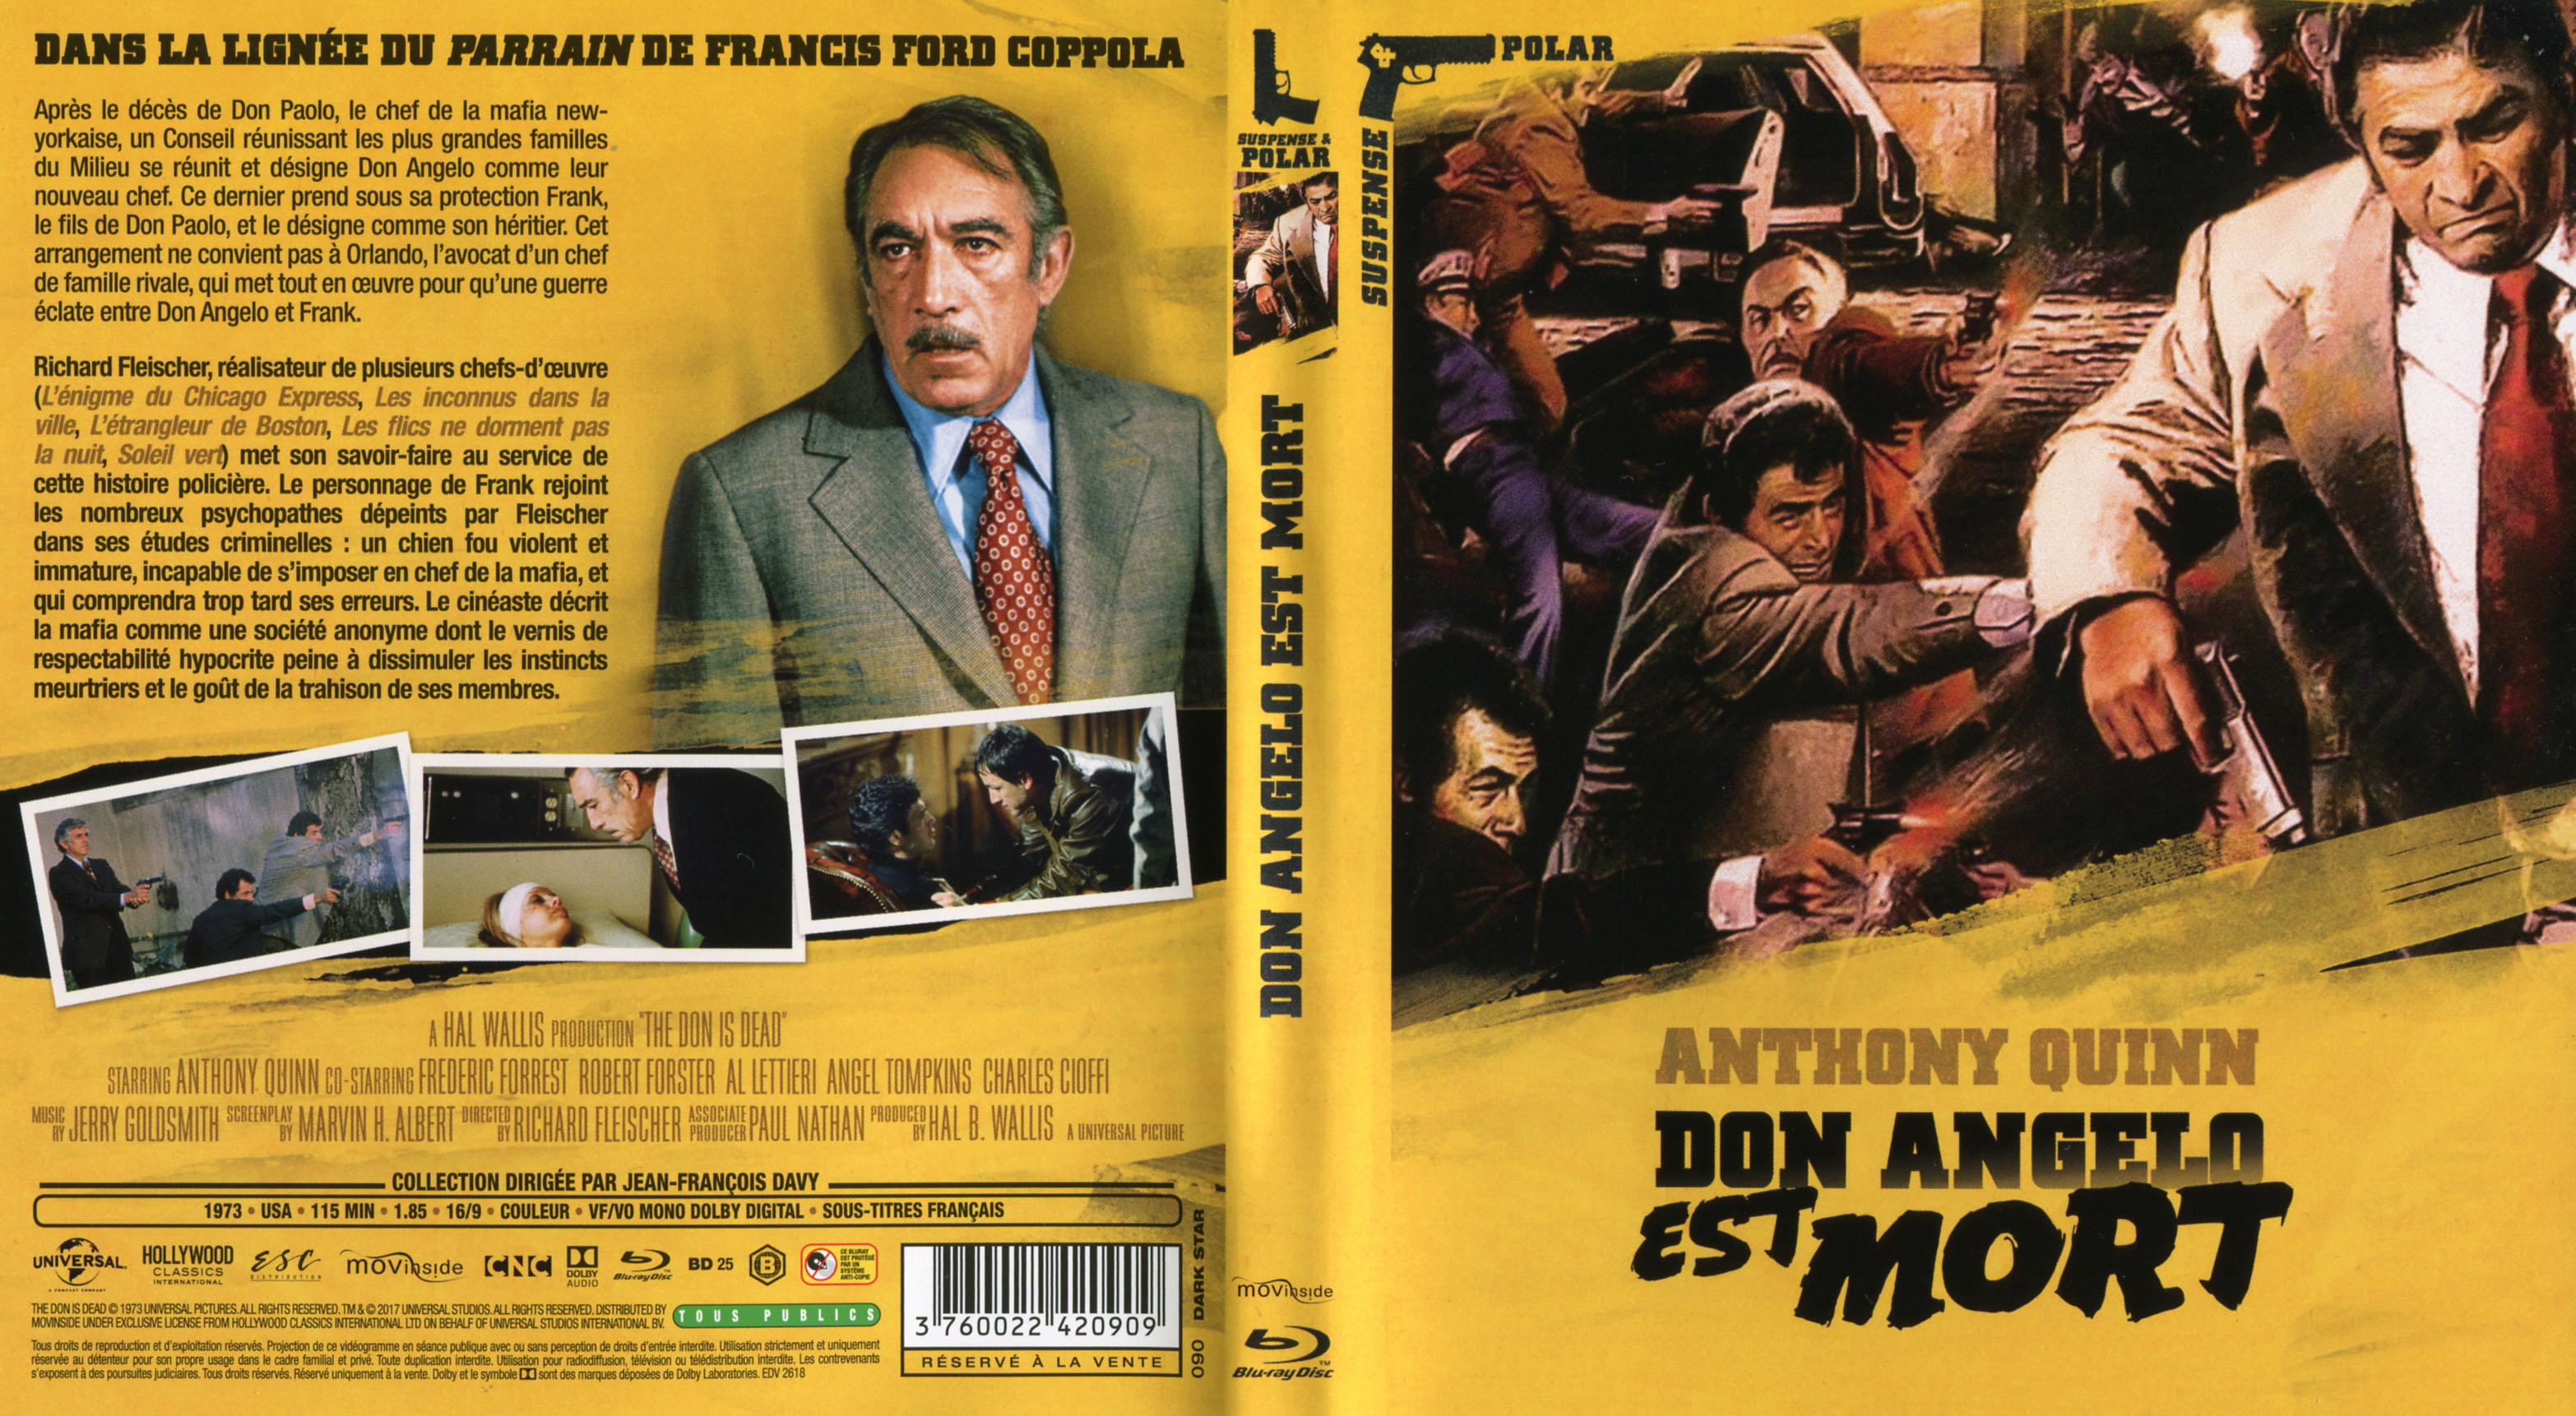 Jaquette DVD Don Angelo est mort (BLU-RAY)